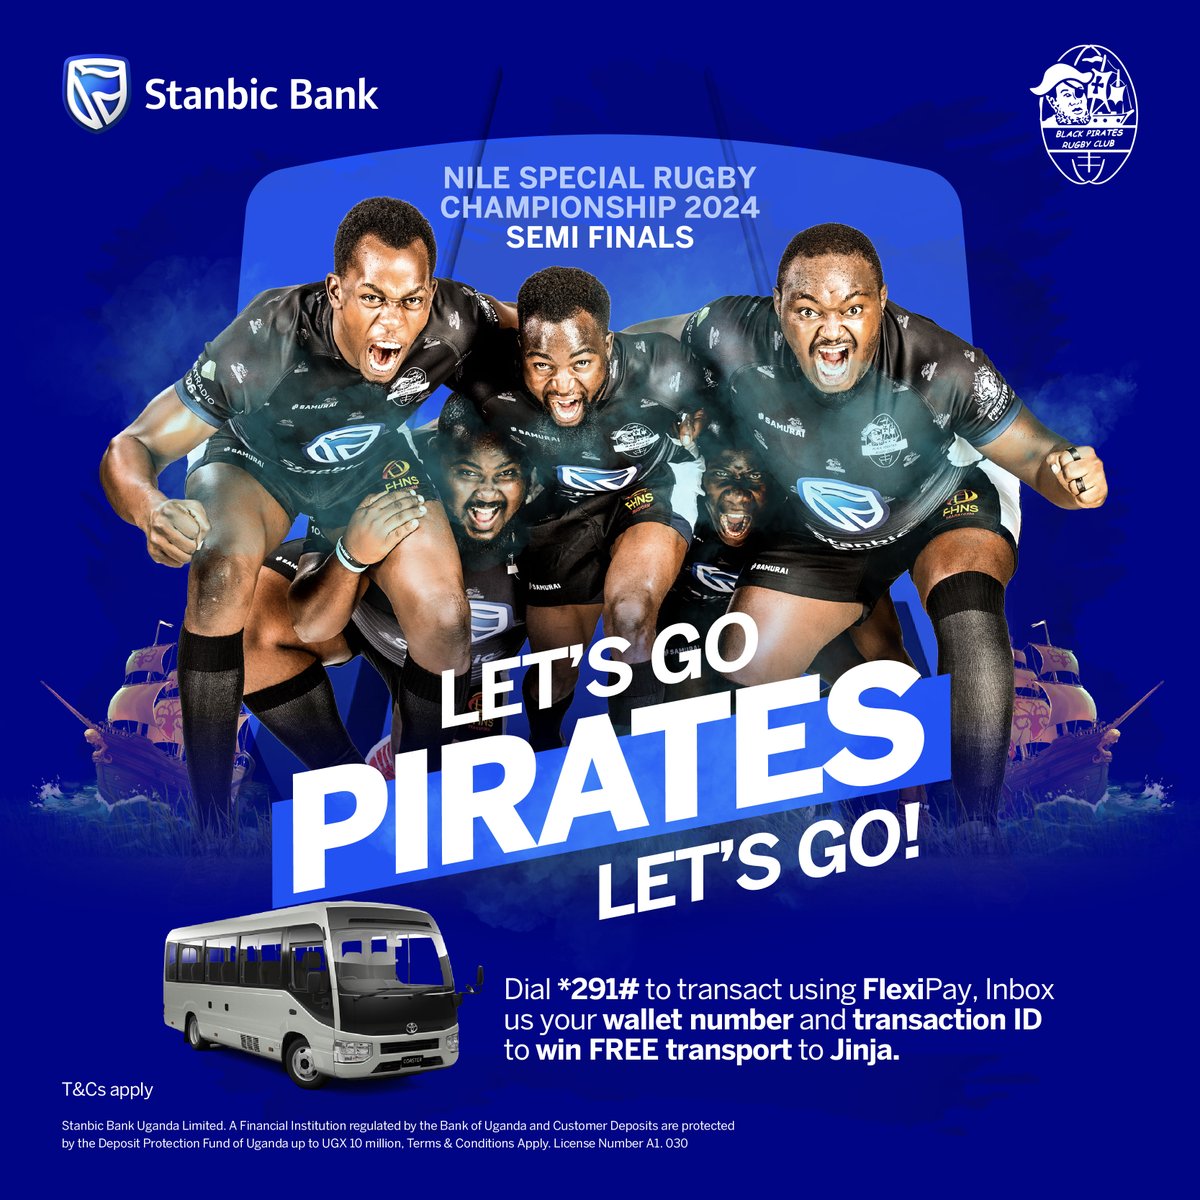 The #StanbicPirates visit the Jinja Hippos this Saturday. Stand a chance to win free transport to Jinja simply by transacting using FlexiPay. DM us the transaction details thereafter. 𝐓𝐞𝐫𝐦𝐬 𝐚𝐧𝐝 𝐂𝐨𝐧𝐝𝐢𝐭𝐢𝐨𝐧𝐬 𝐀𝐩𝐩𝐥𝐲. #KikoleForLess with #FlexiPay